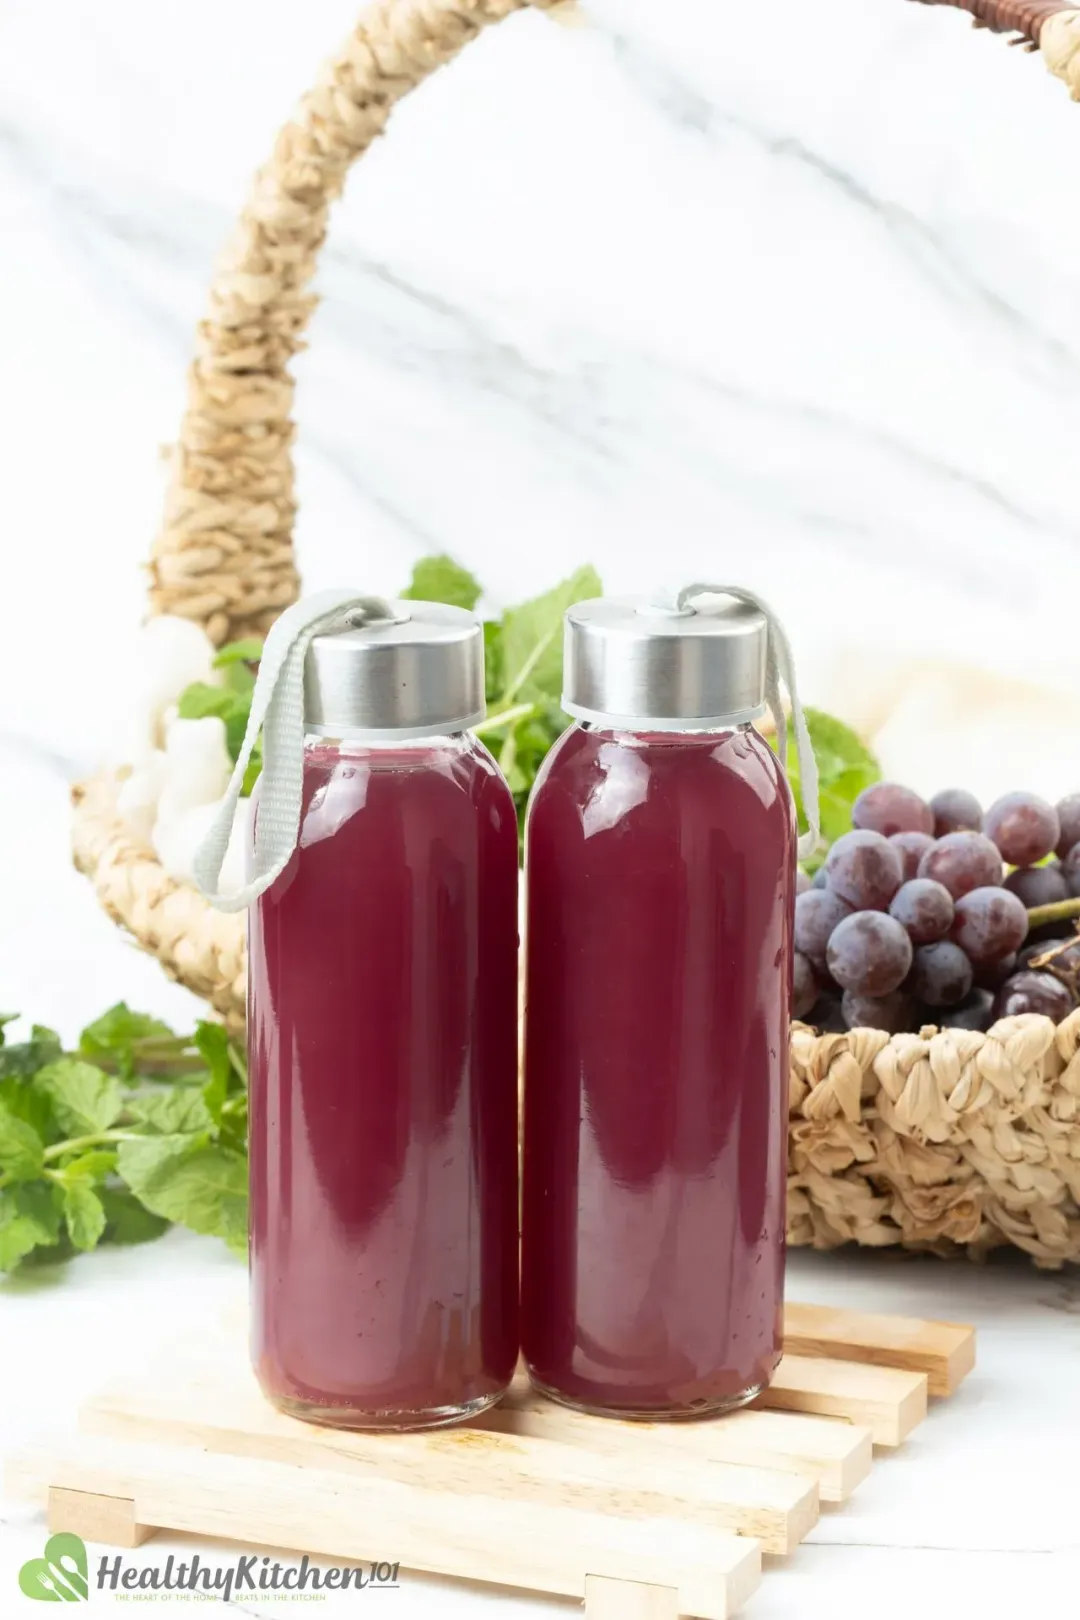 Two bottles filled with red grape juice and cider drink, next to a basket of grapes